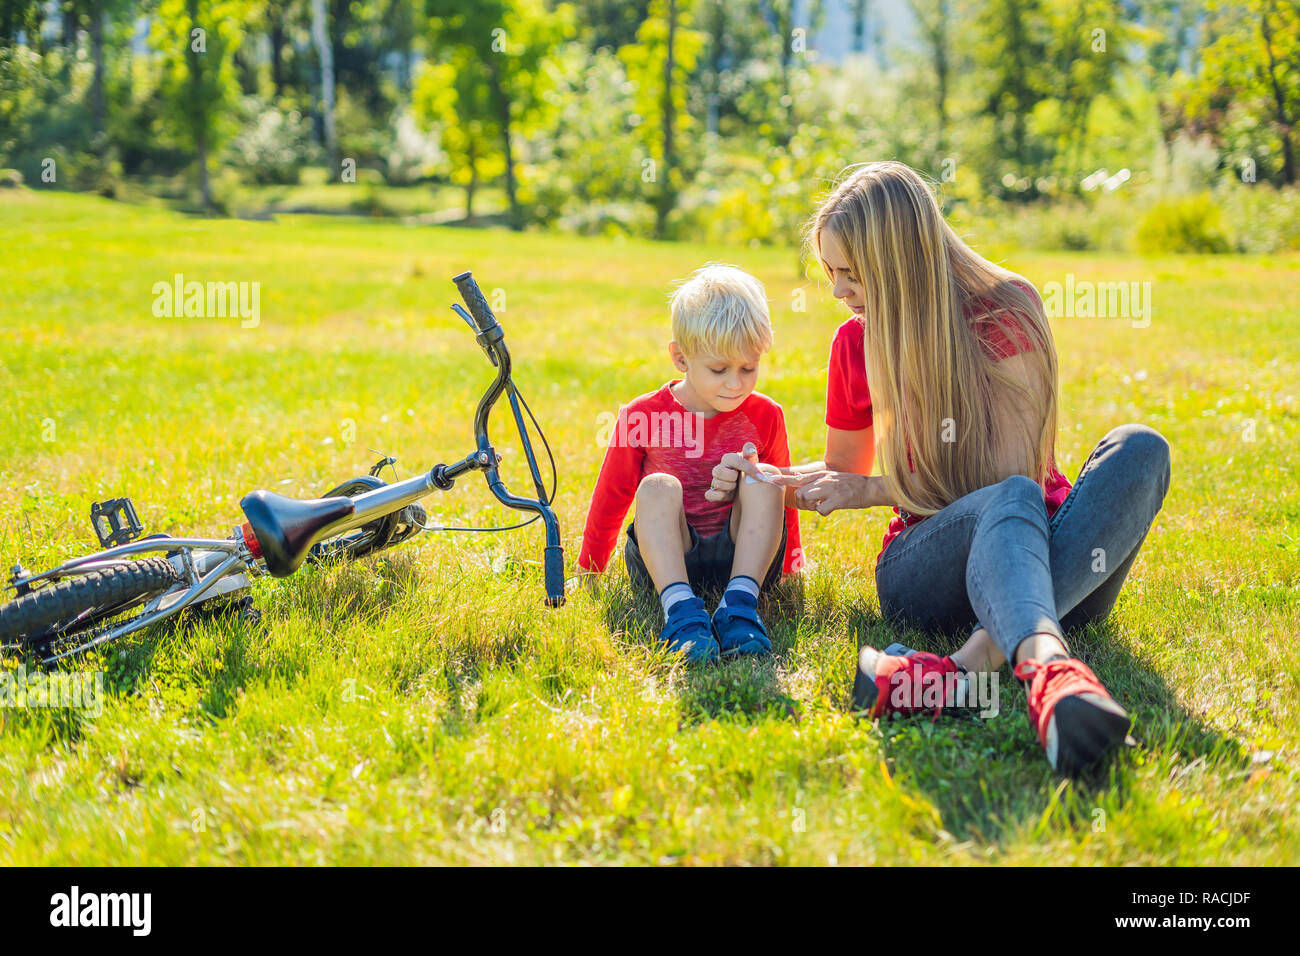 The boy fell off the bicycle, his mother pastes a plaster on his knee BANNER, LONG FORMAT Stock Photo